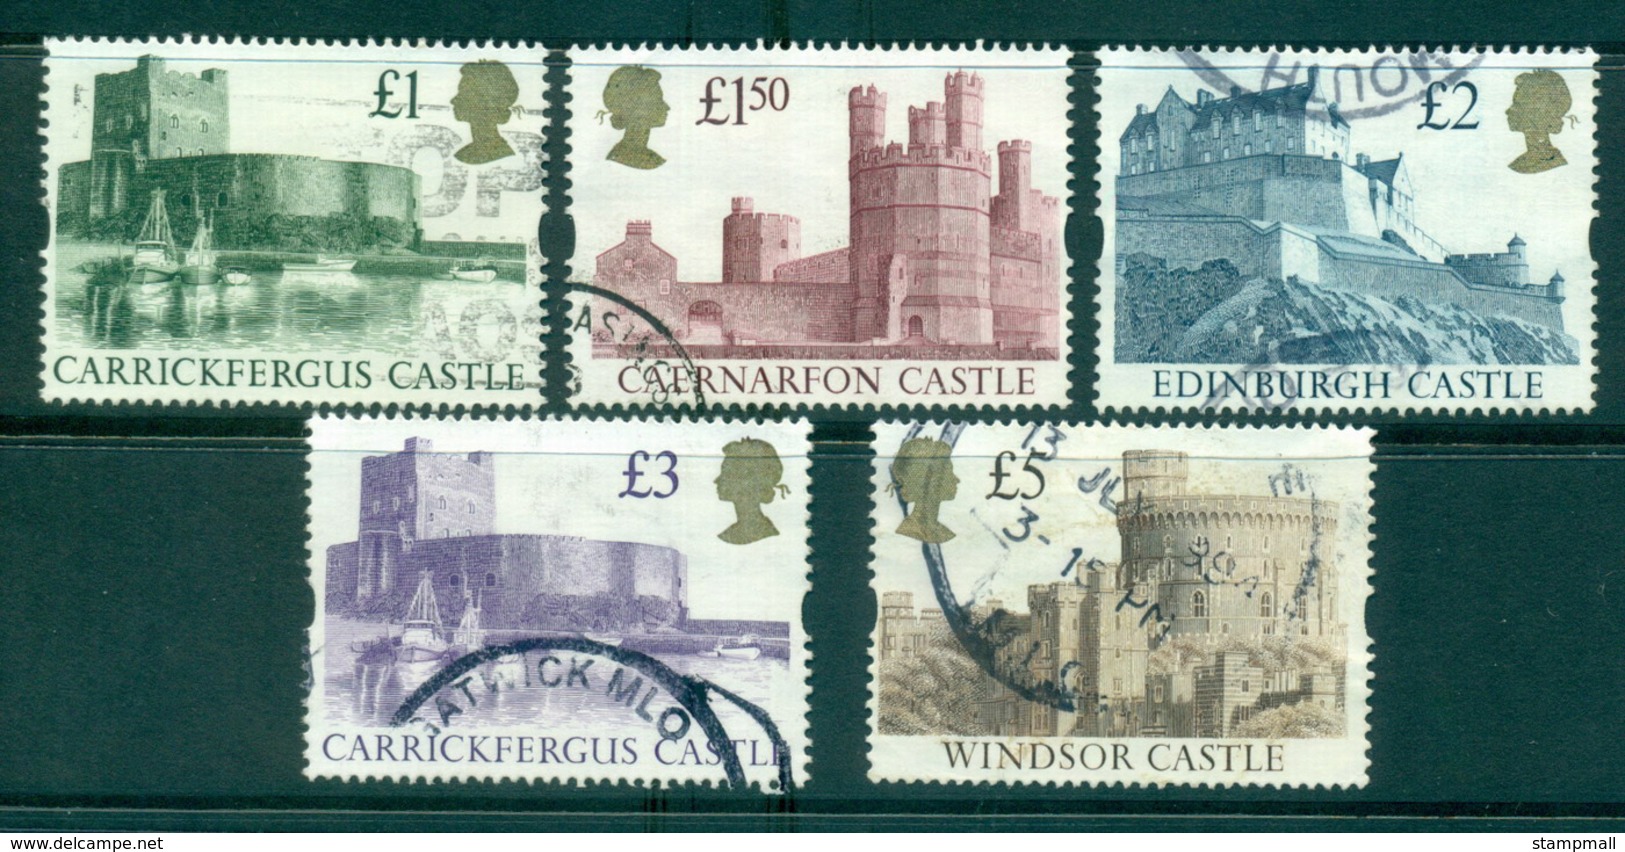 GB 1992-95 Castles Syncopated (5) FU Lot33005 - Unclassified